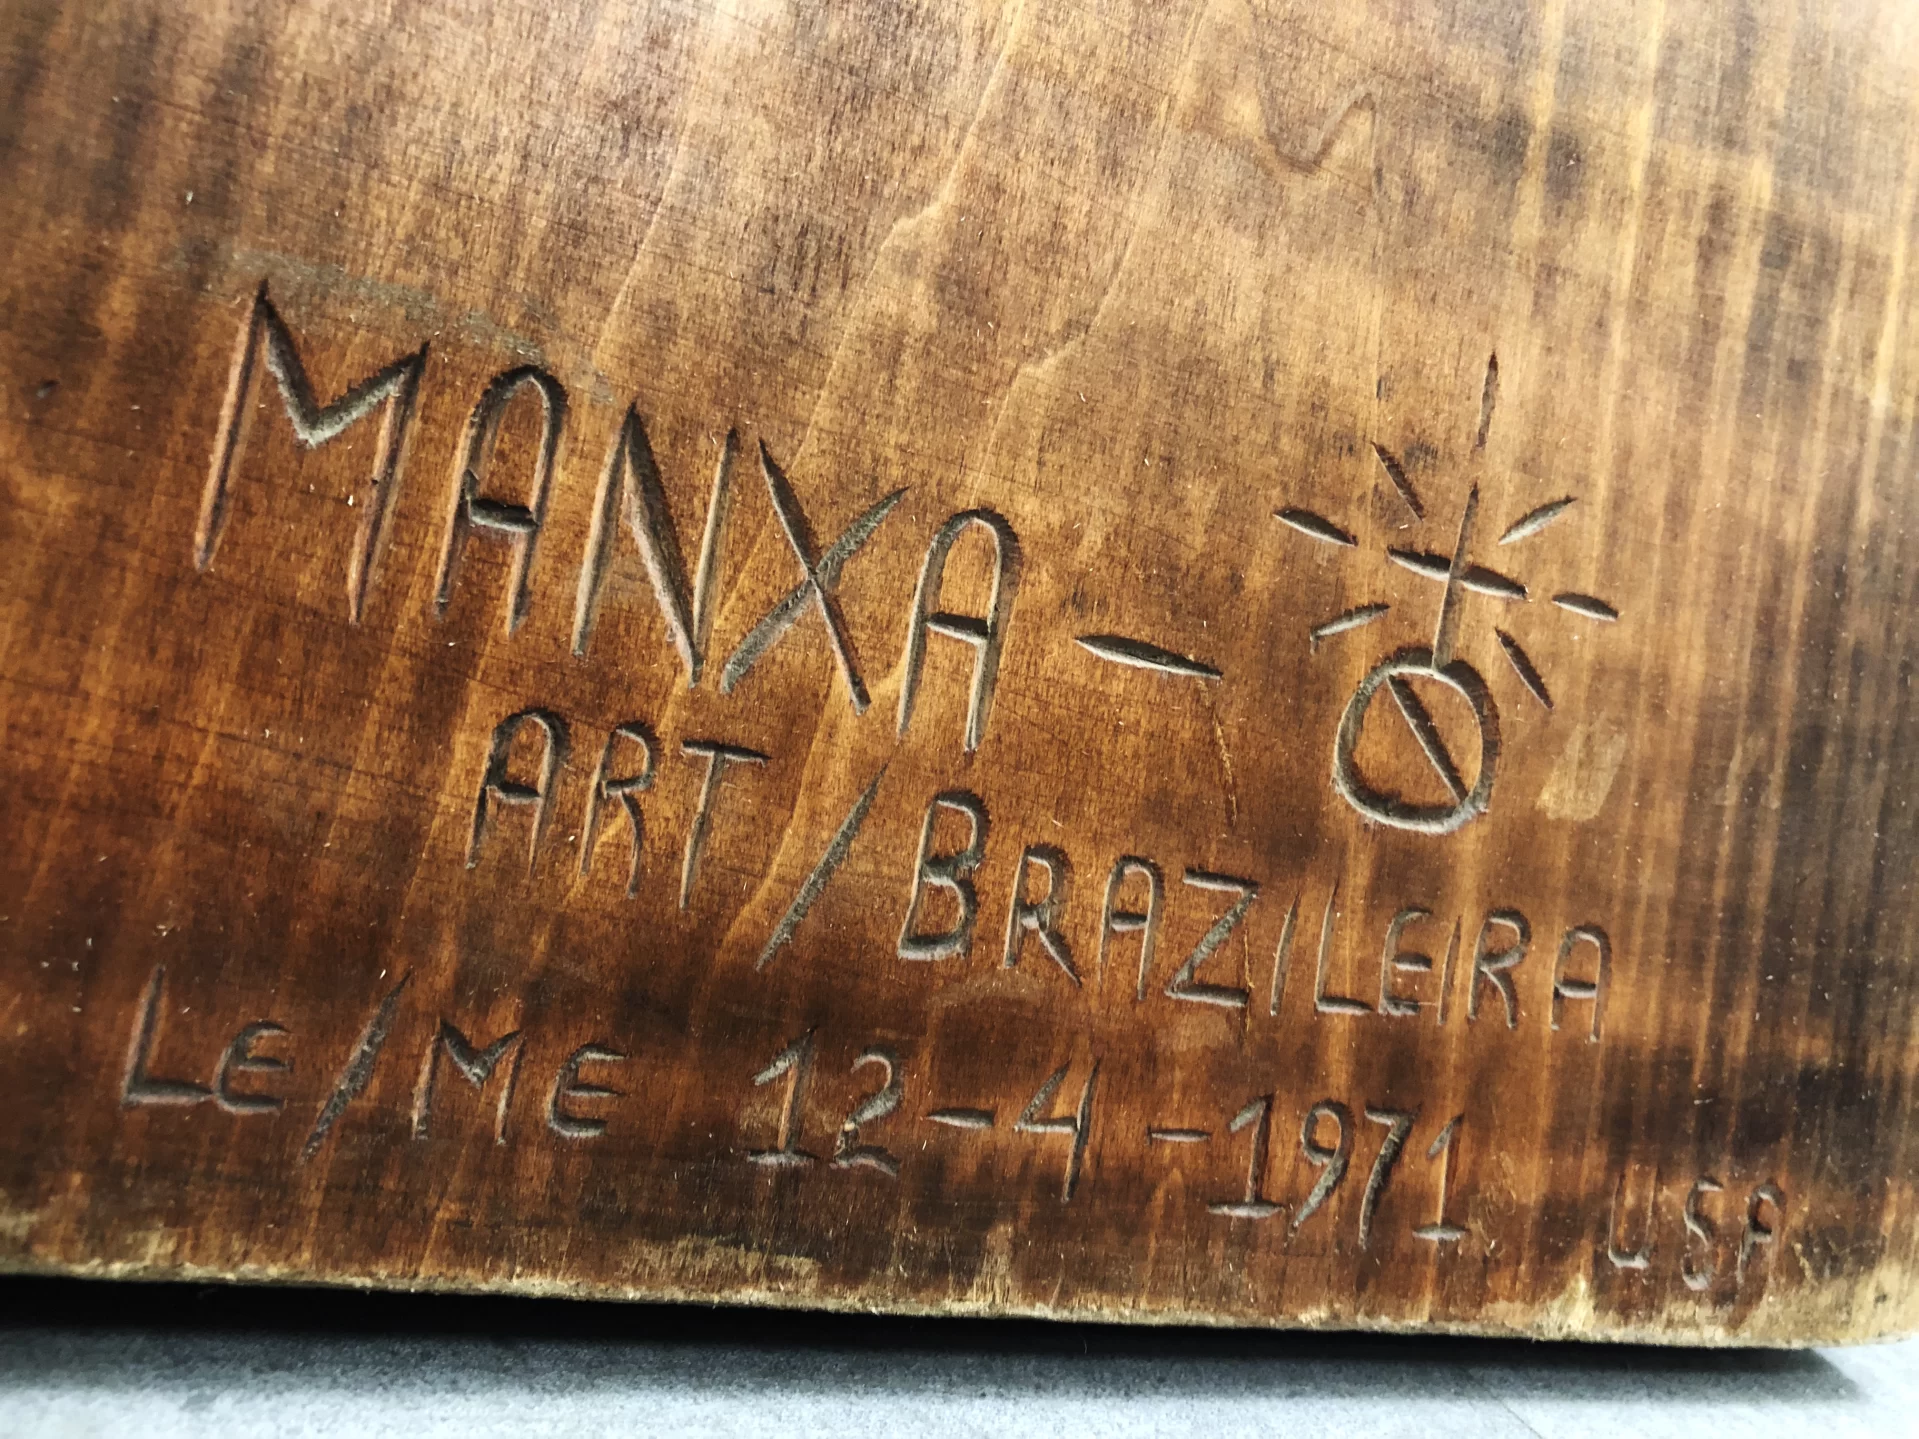 This wood sculpture of Christ on the cross was created by the Brazilian sculptor Ziltamir Sebastião Soares de Maria (1947–2013) (aka "Manxa") who was in residence at Bates in spring 1971 under a program called "Maine's Partners of the Alliance," a culture exchange program then part of USAID and now a private entity called "Partners of the Americas."  

The back of the sculpture has what appears to be its Portuguese title, Auto Retrato Do Meu Povo, or "Self Portrait of My People" 

Size: 7 feet tall and 5 feet 8 inches wide

When Created: The back has written March 5, 1971, with a dollar figure (a price estimate for a potential sale?) also written ($800).

Inscription at Top: “INRI,” Latin for “Jesus, King of the Jews,” commonly seen on crucifixes. 

The sculpture was stored by Facility Services for years, and was photographed in the BCO offices In Lane Hall